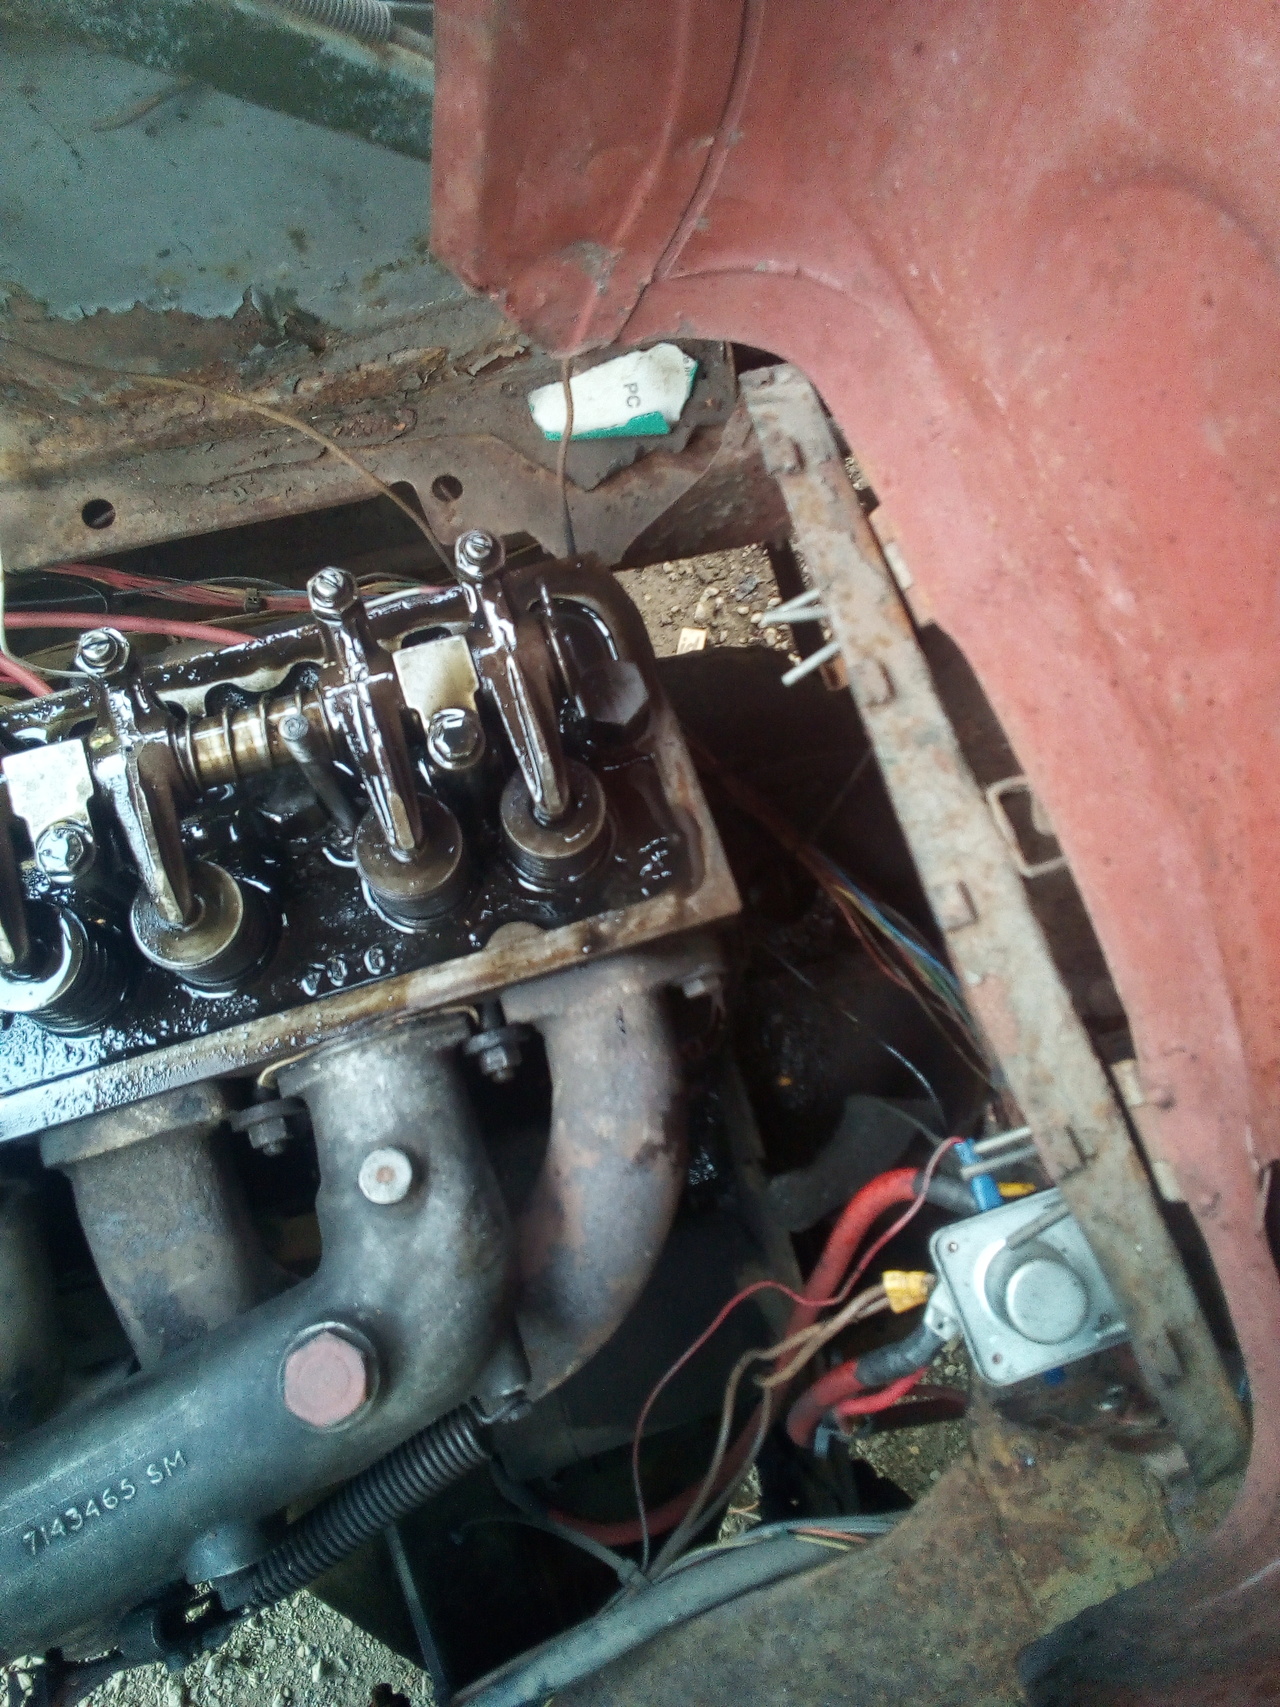 The engine with the rocker cover removed, and oil dribbling over
the back edge of the head.